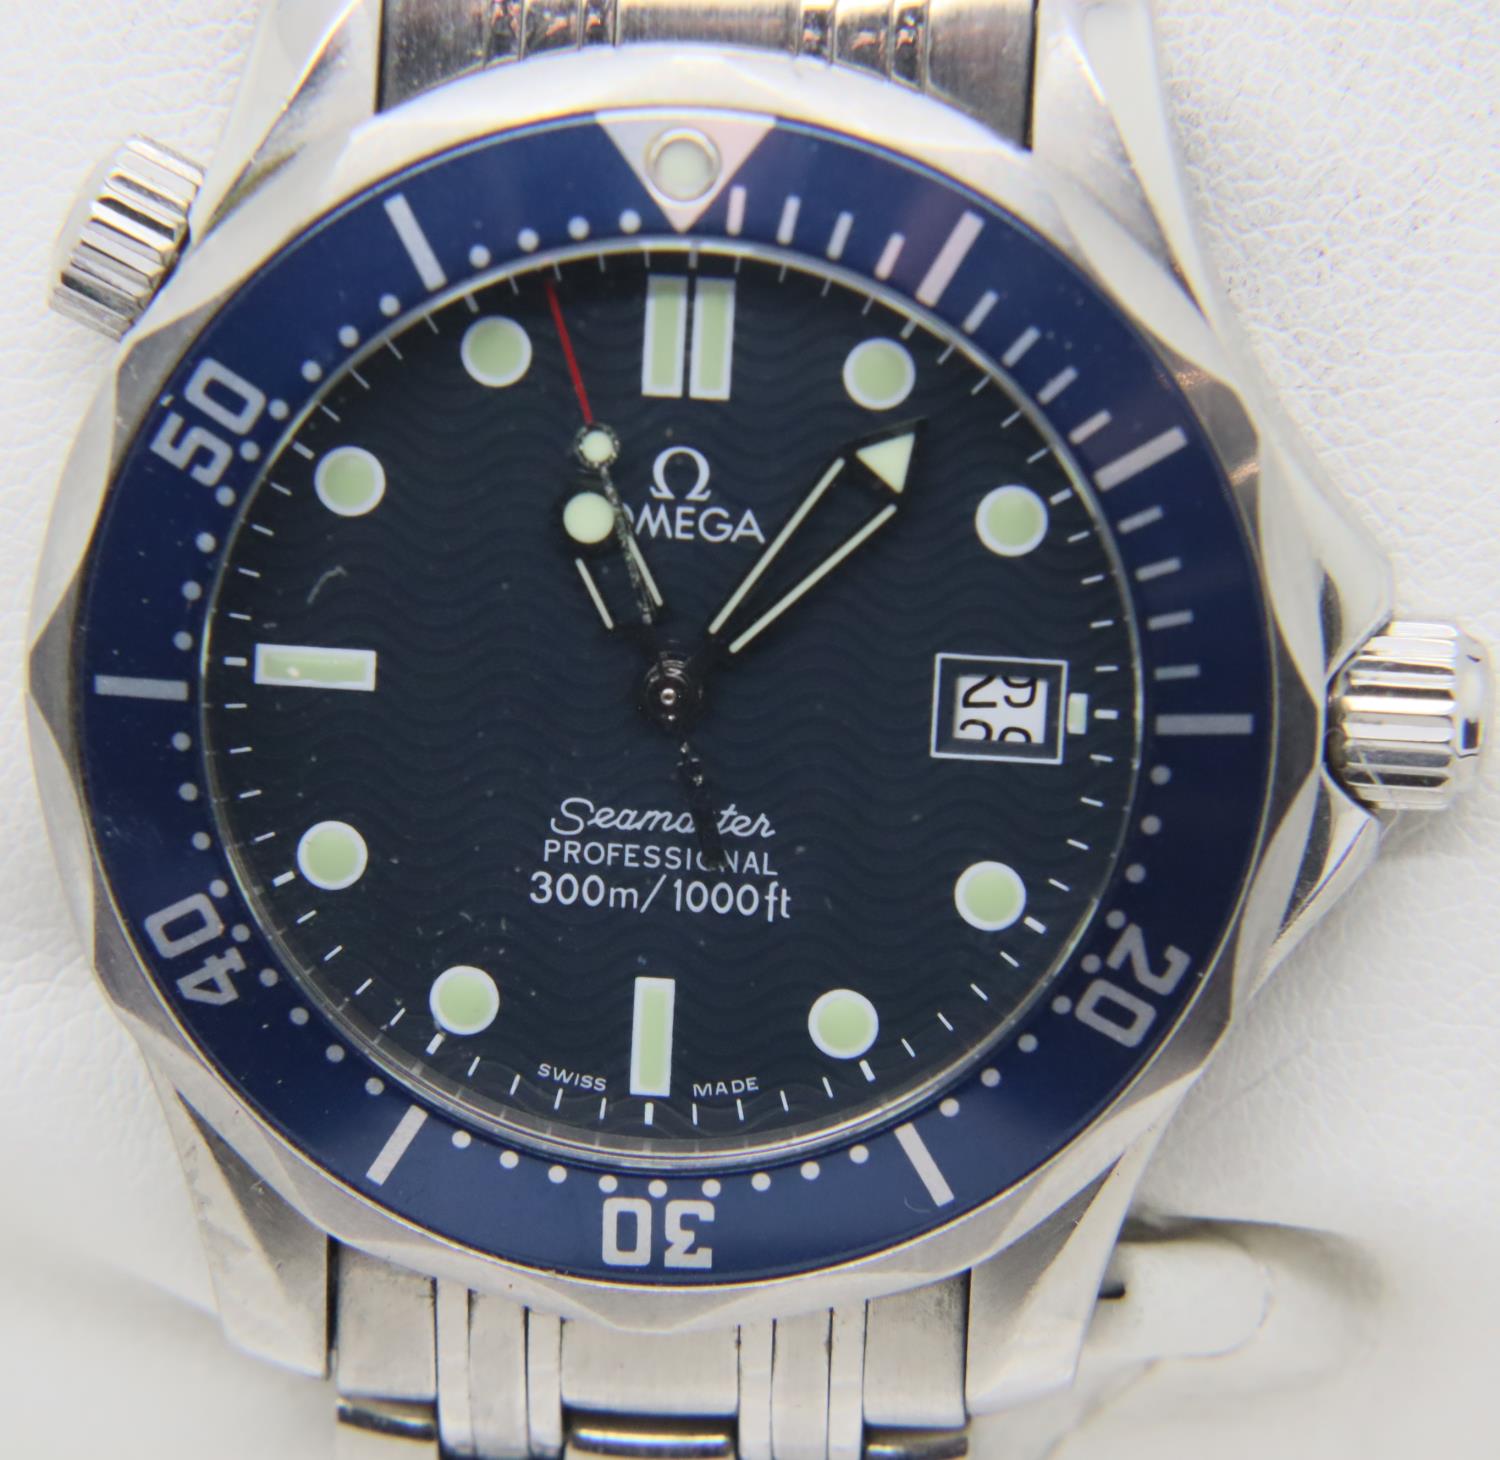 Omega mid size Seamaster Professional 300M quartz wristwatch in steel, with a blue-wave dial, blue